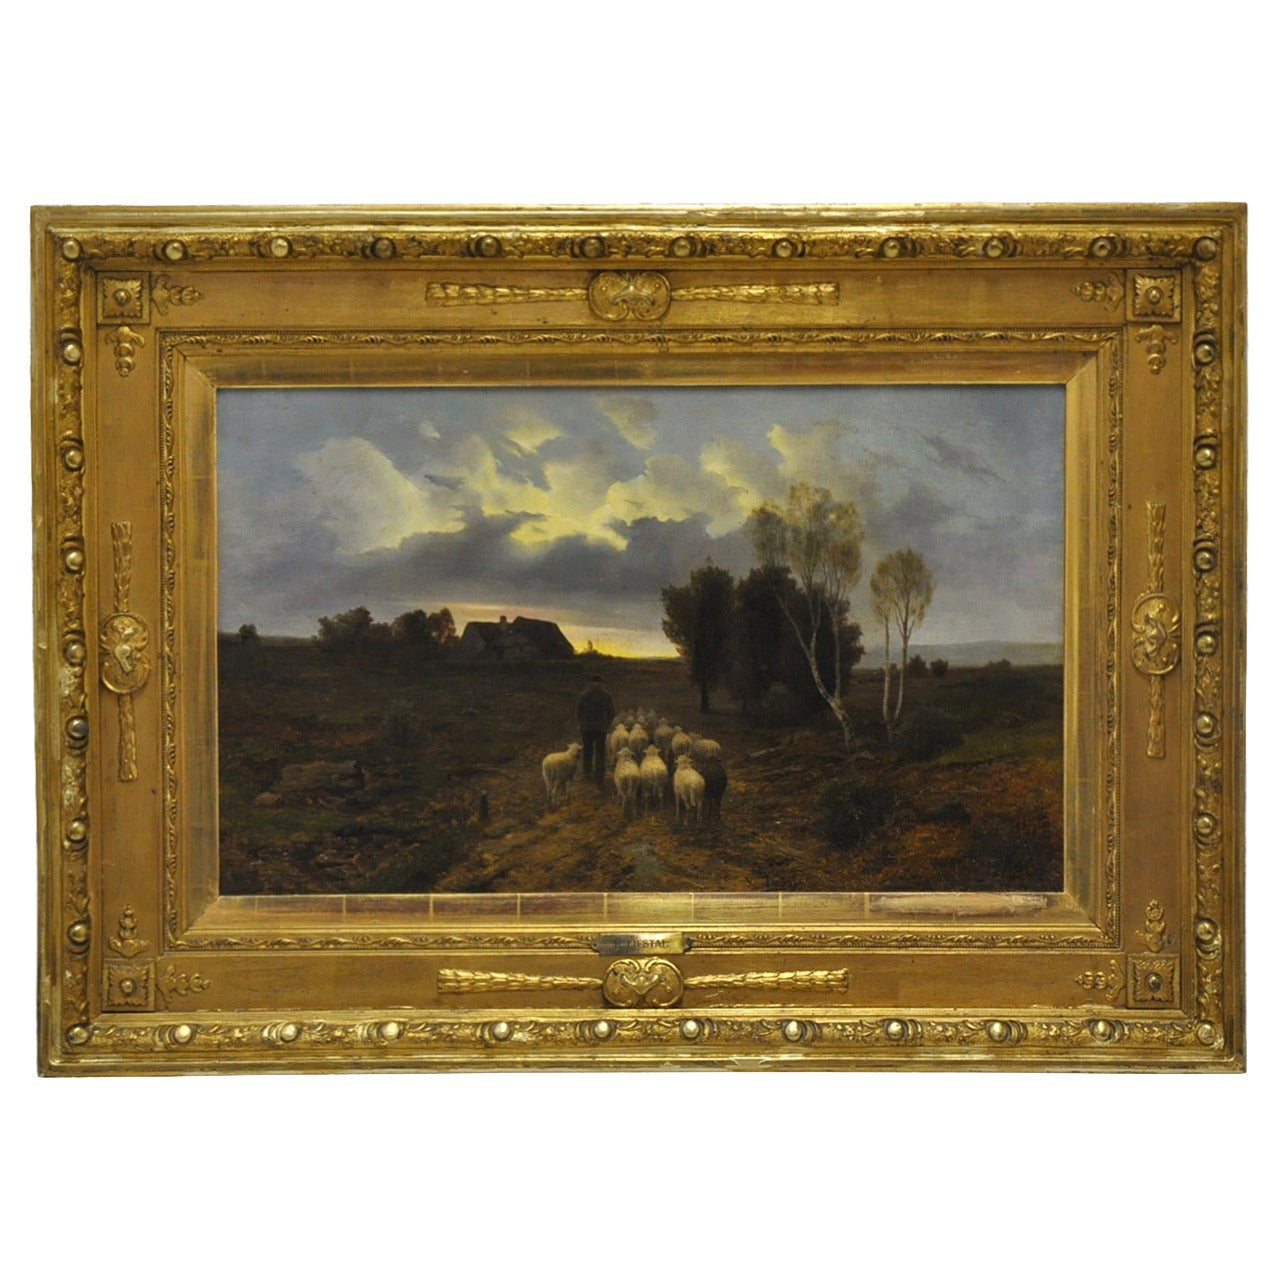 19th C. French Signed Oil on Canvas with Sheep